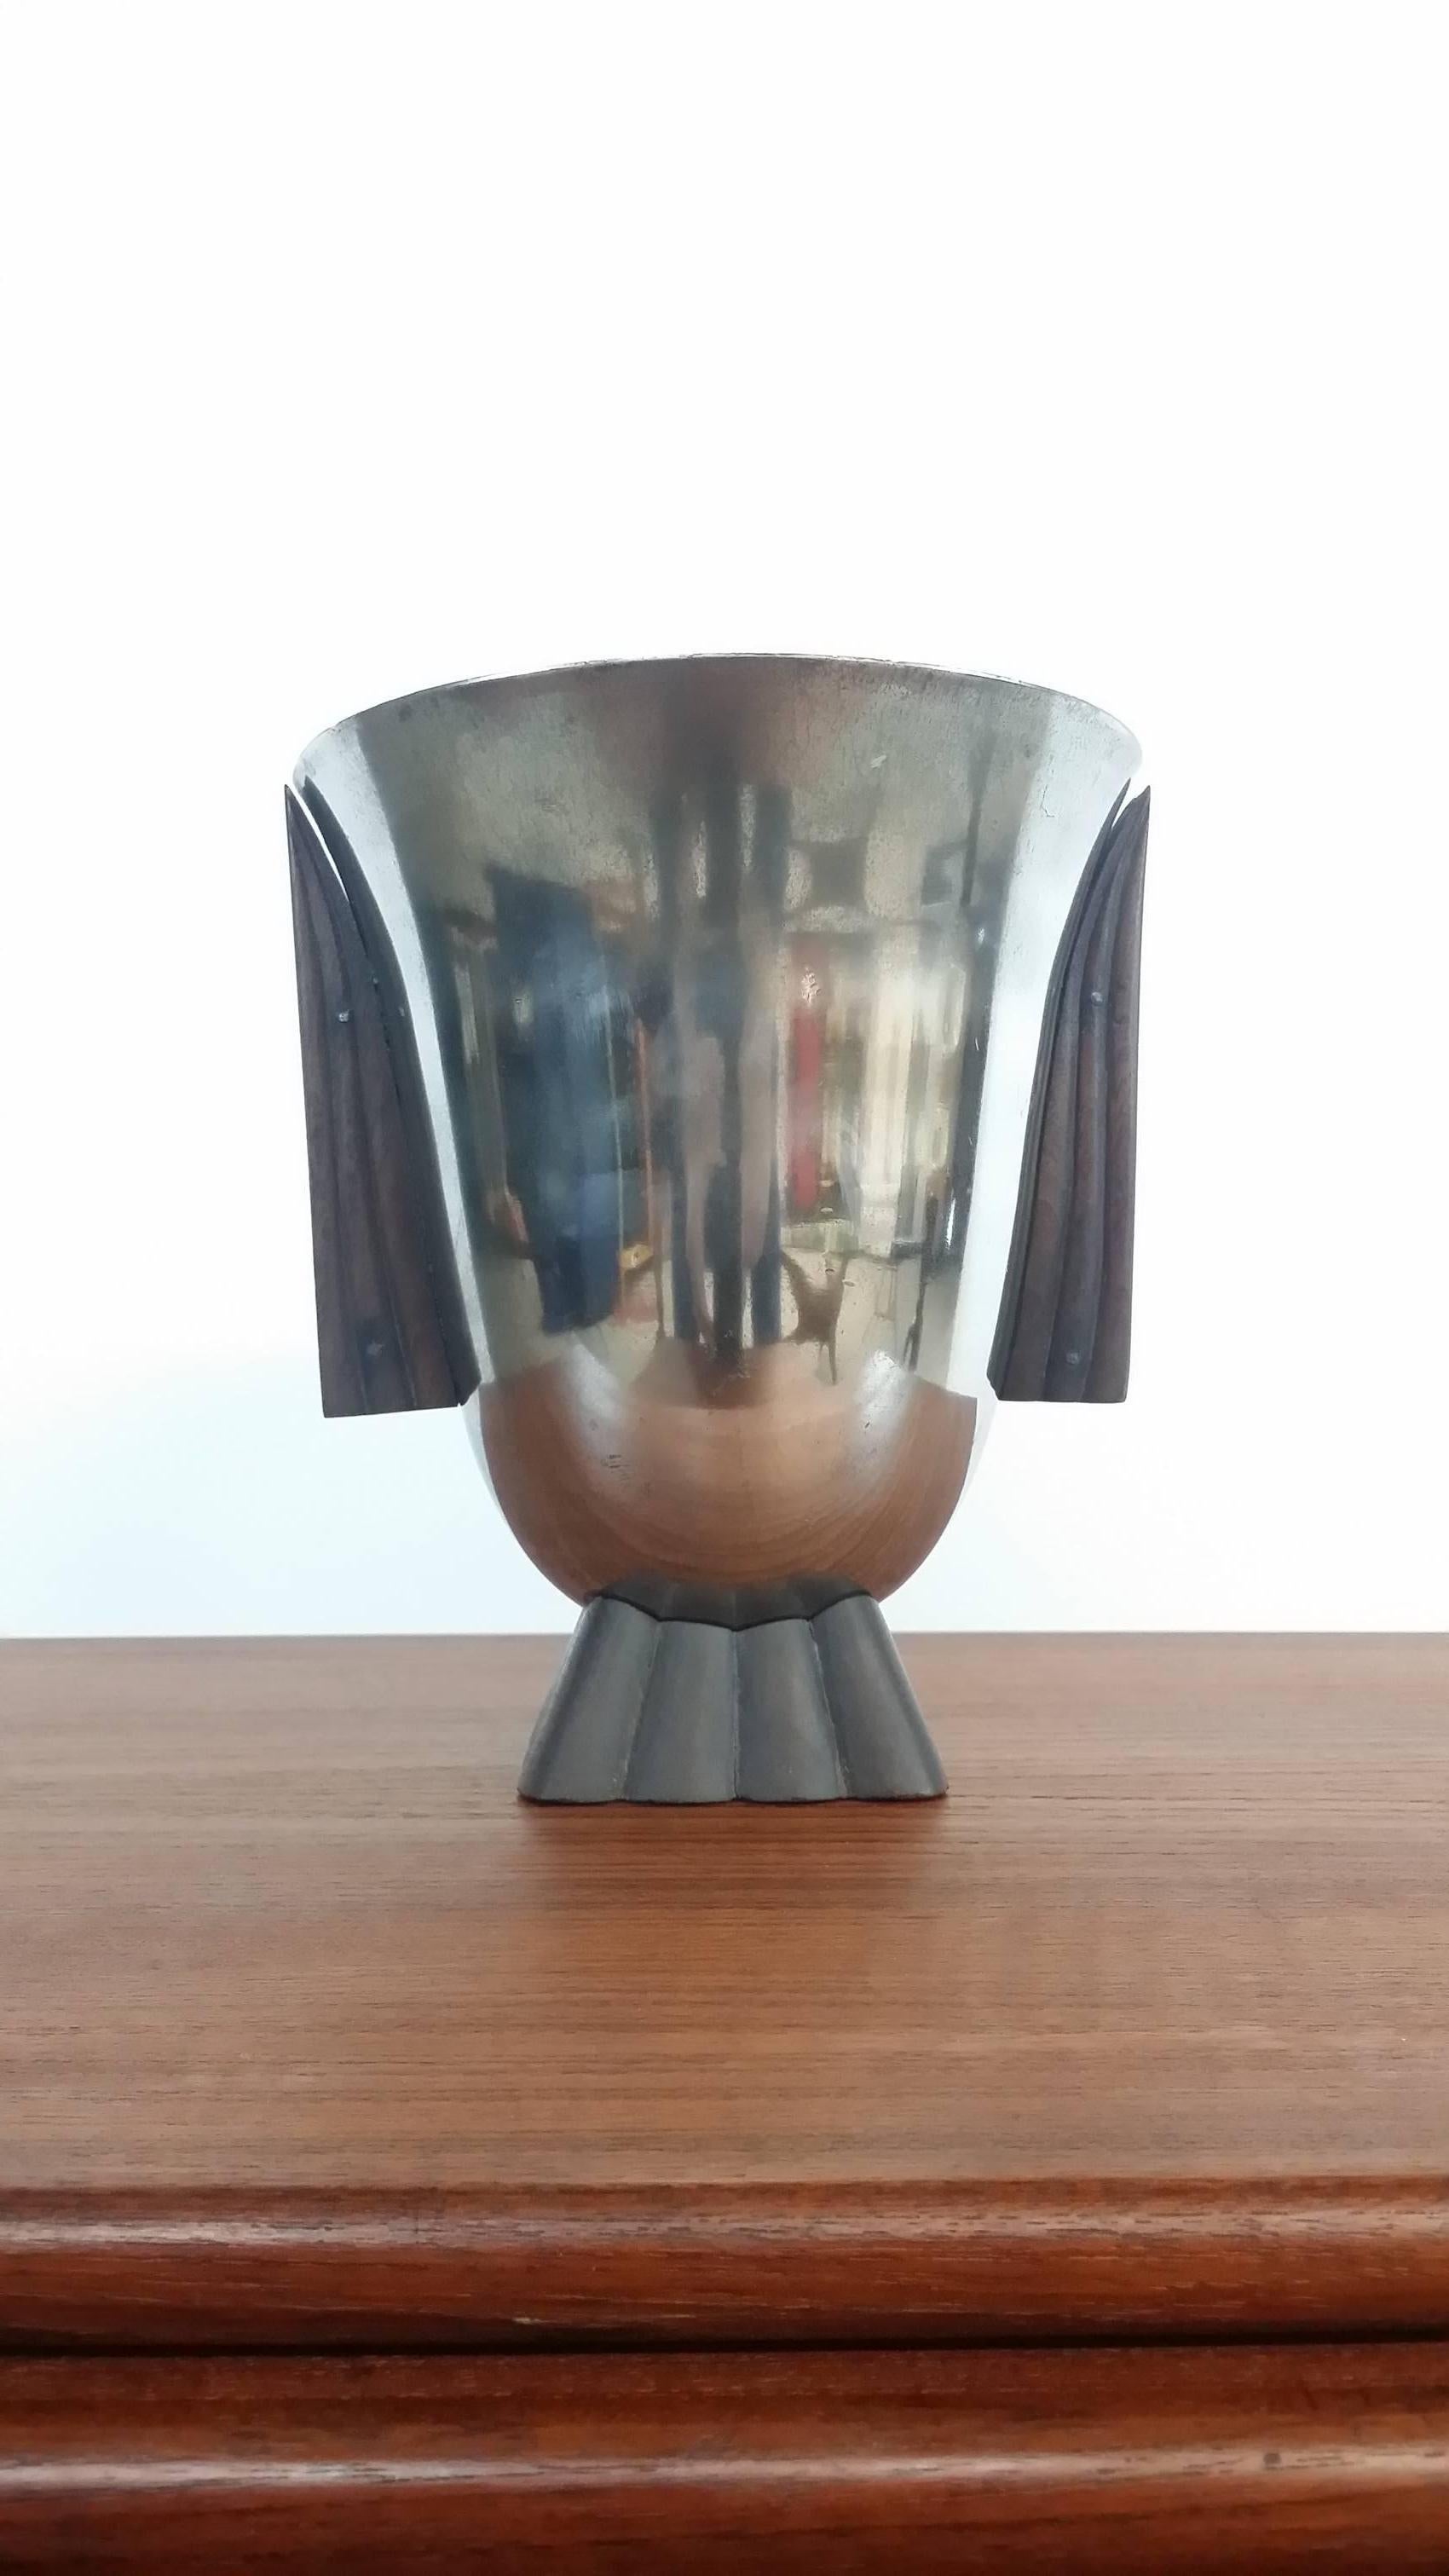 American Handcrafted Vessel by Donn Jefferson Sheets, circa 1936